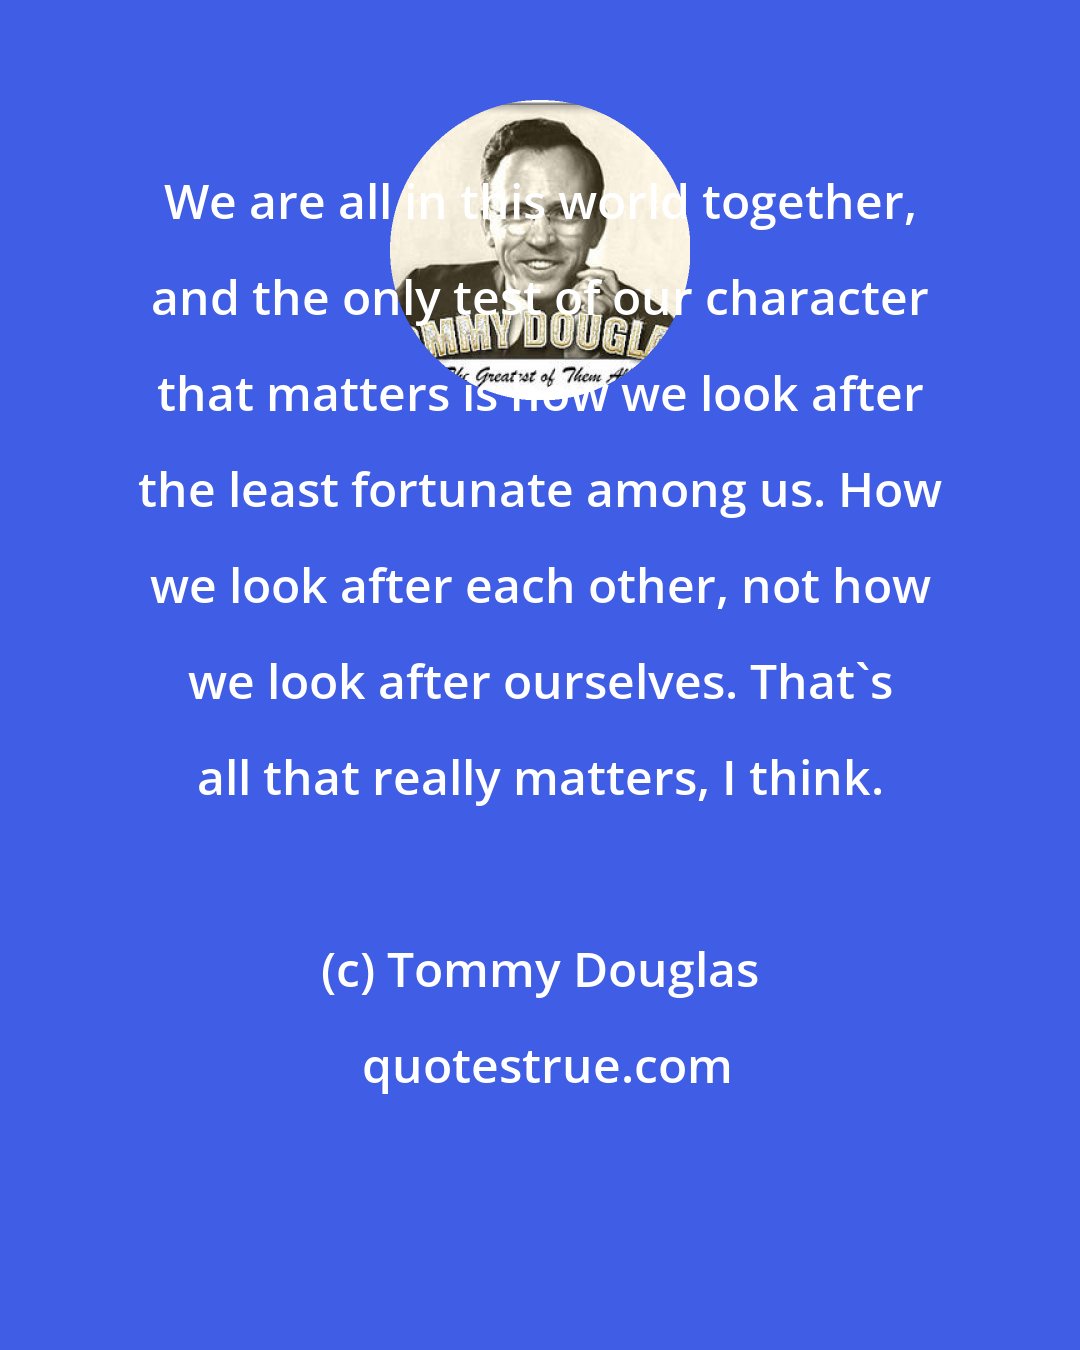 Tommy Douglas: We are all in this world together, and the only test of our character that matters is how we look after the least fortunate among us. How we look after each other, not how we look after ourselves. That's all that really matters, I think.